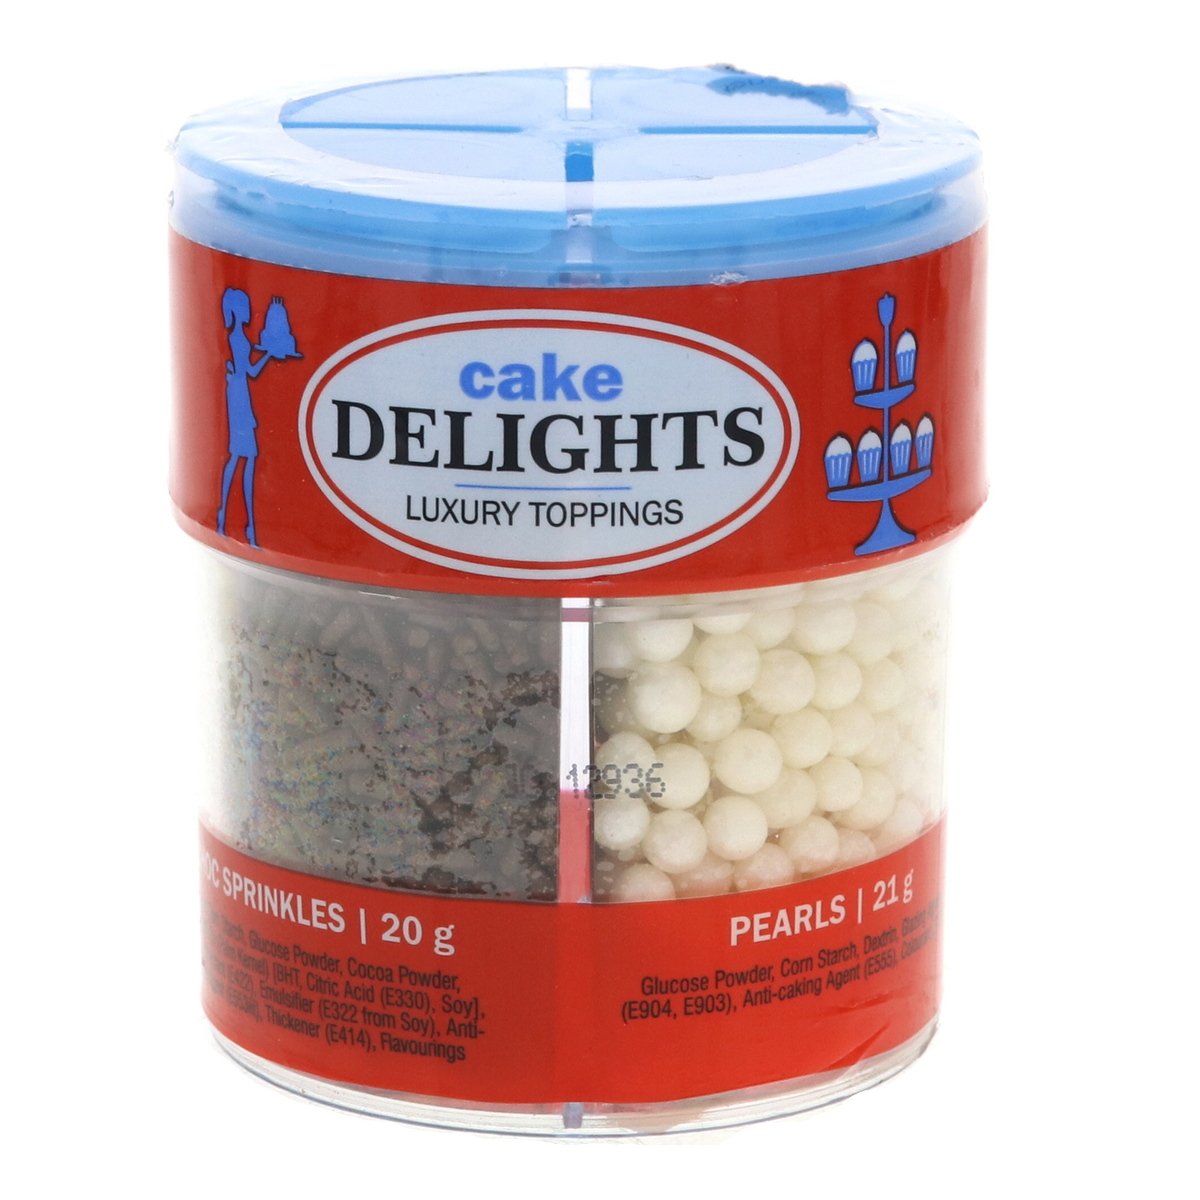 Cake Delights Cake Luxury Toppings 87 g